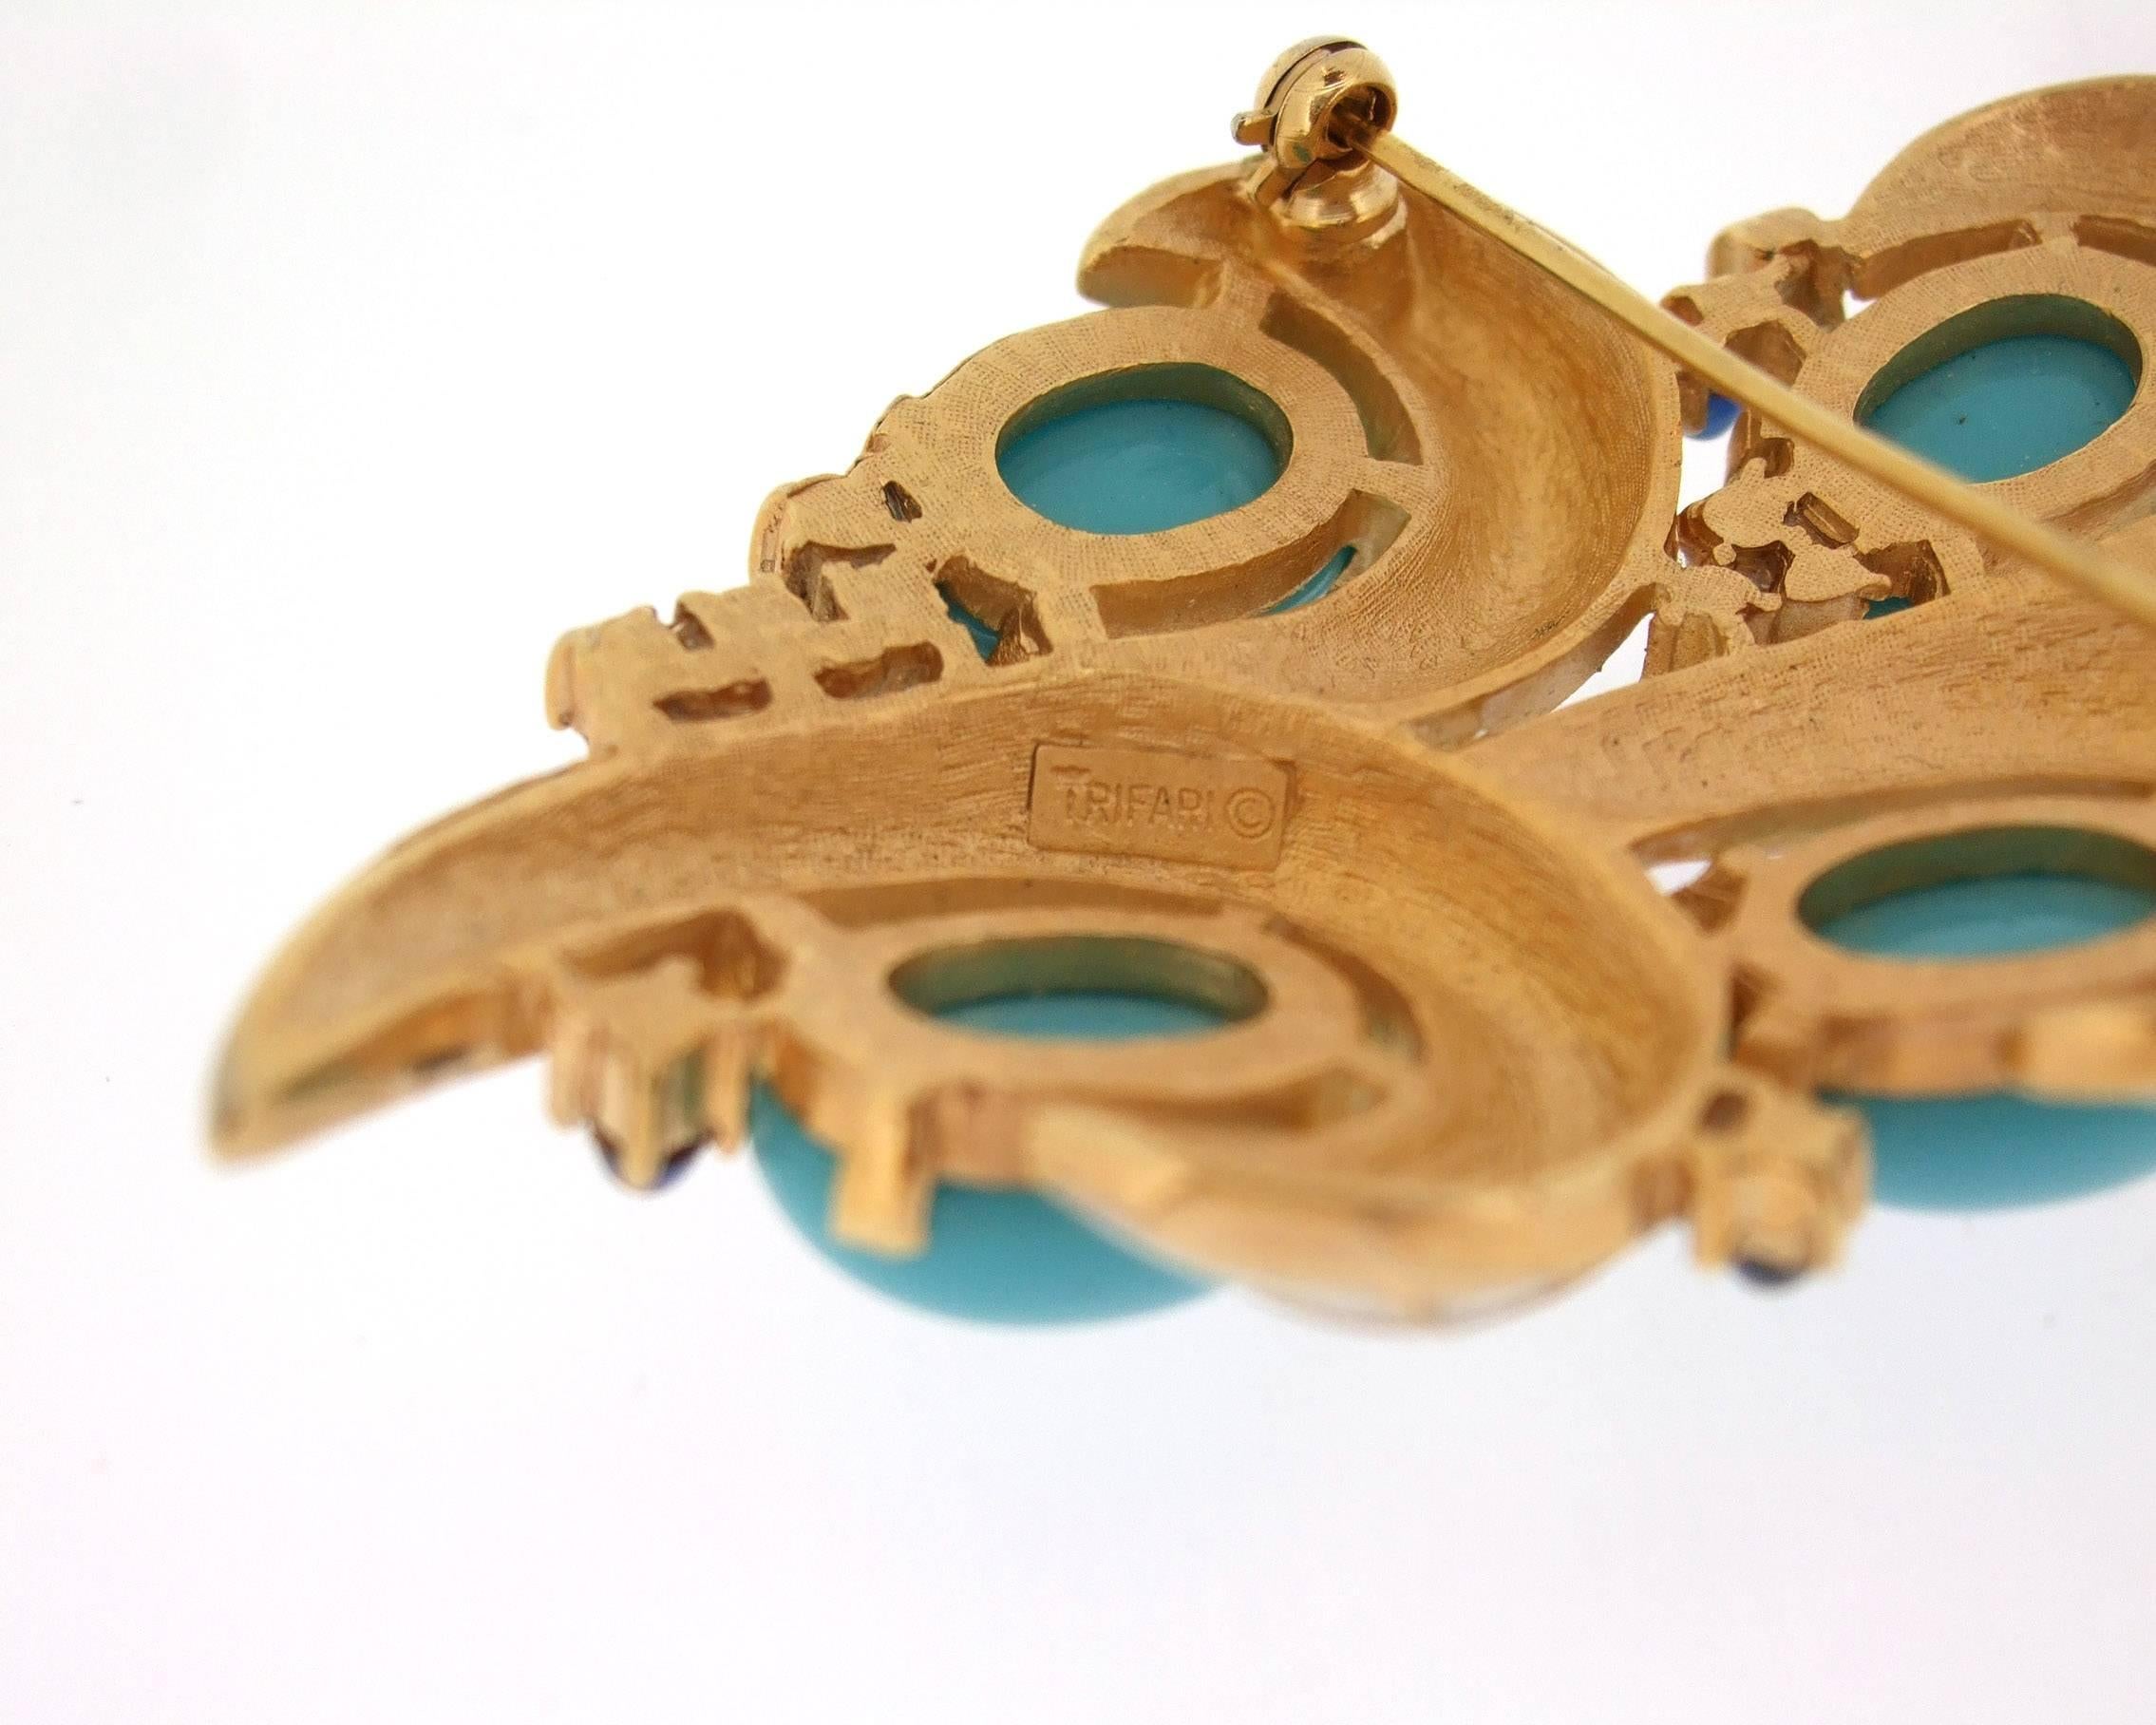 Women's Vintage White Enamel and Turquoise Brooch by Trifari L'Orient Collection 1968